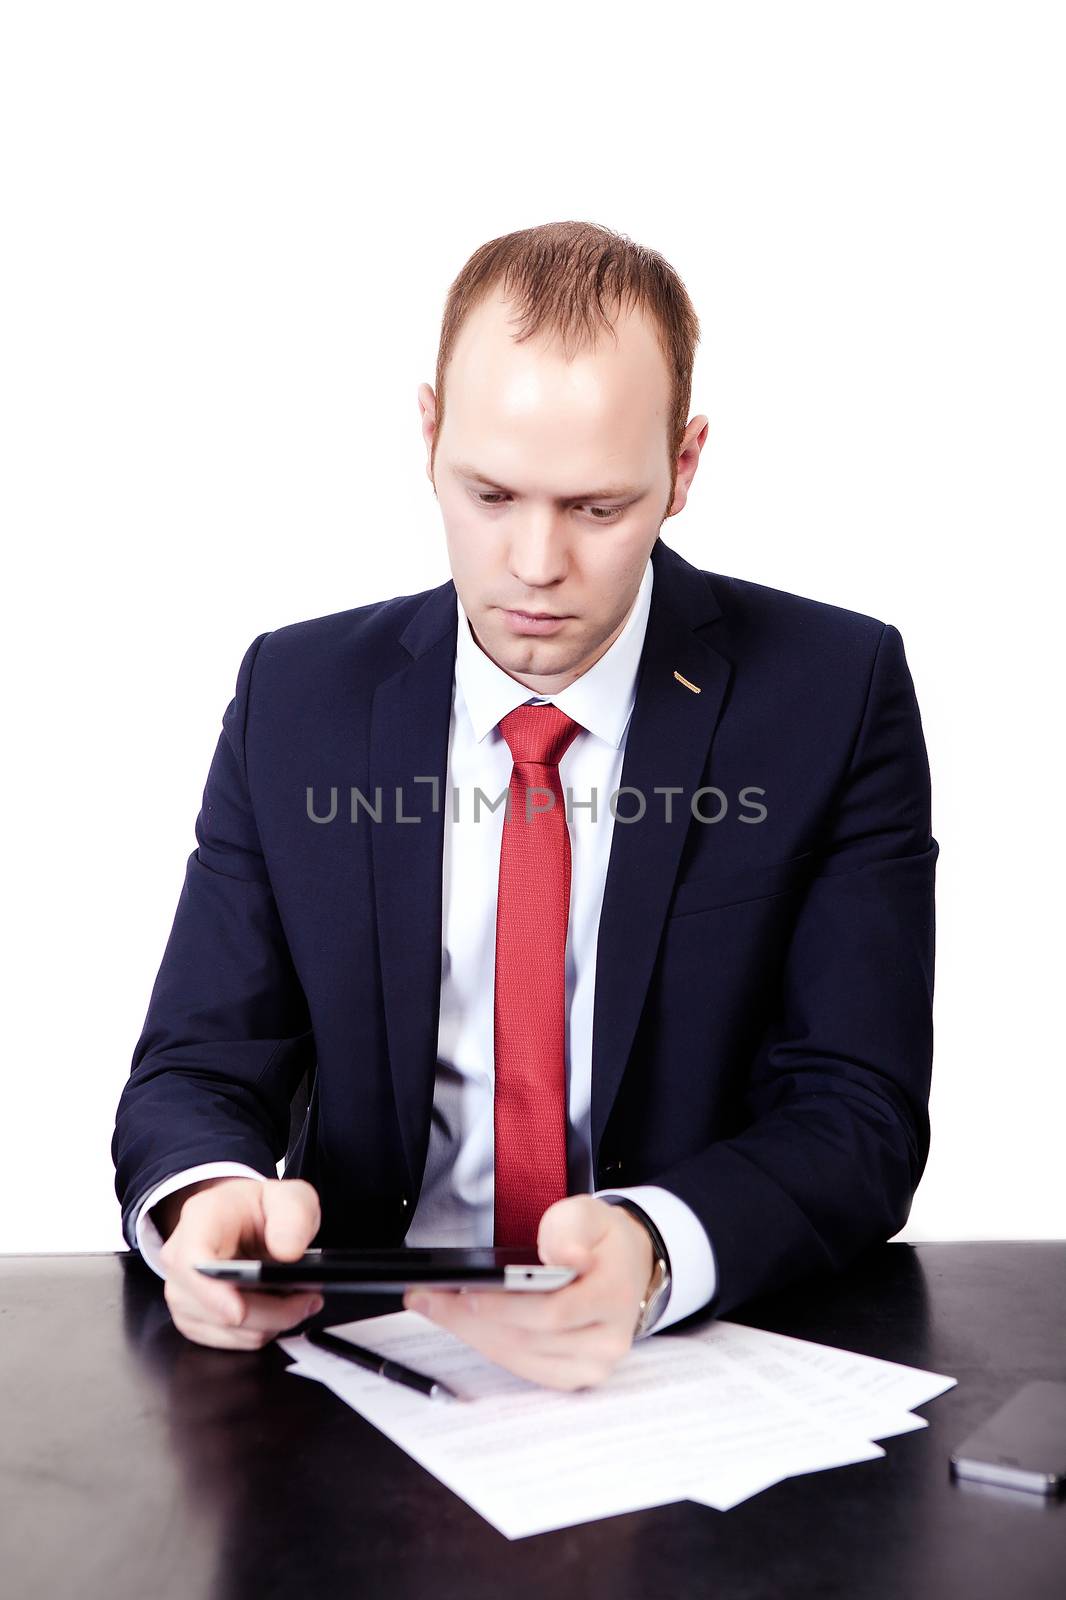 Serious American Businessman in red tie at the table working on the tablet. Isolated on white background